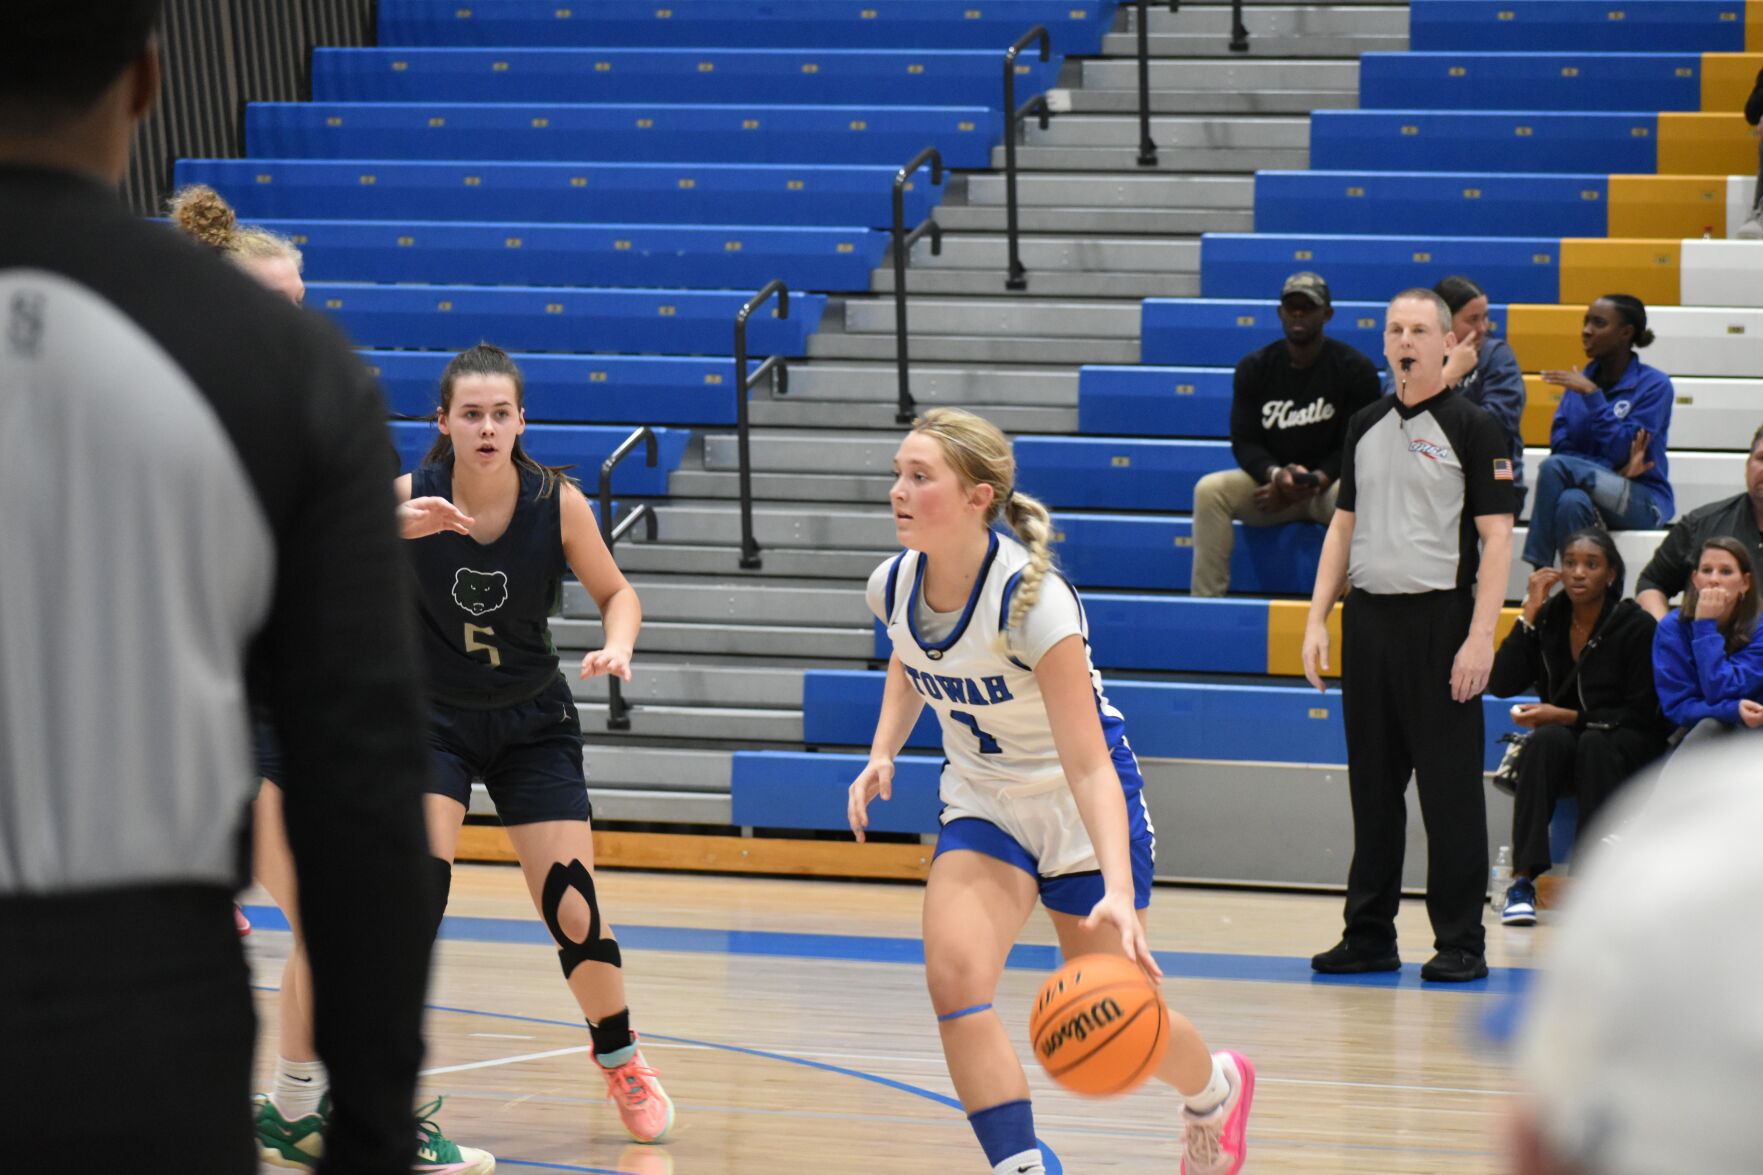 Etowah Girls Basketball Team Secure Crucial Region Win with Strong Comeback